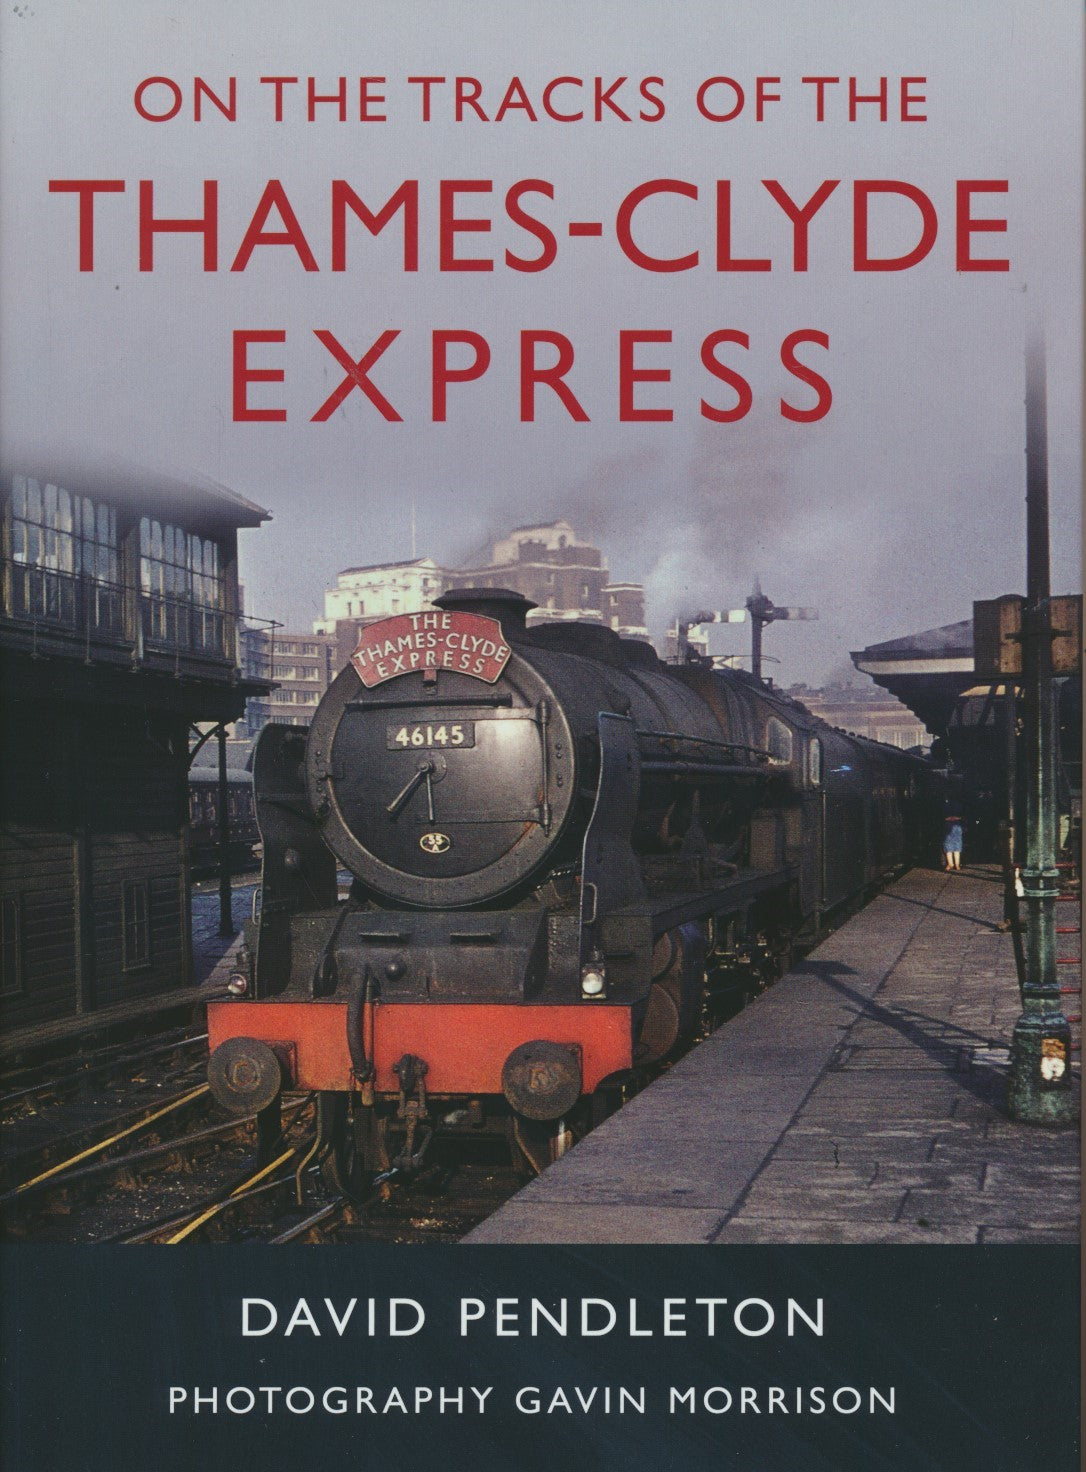 On The Tracks Of The Thames-Clyde Express